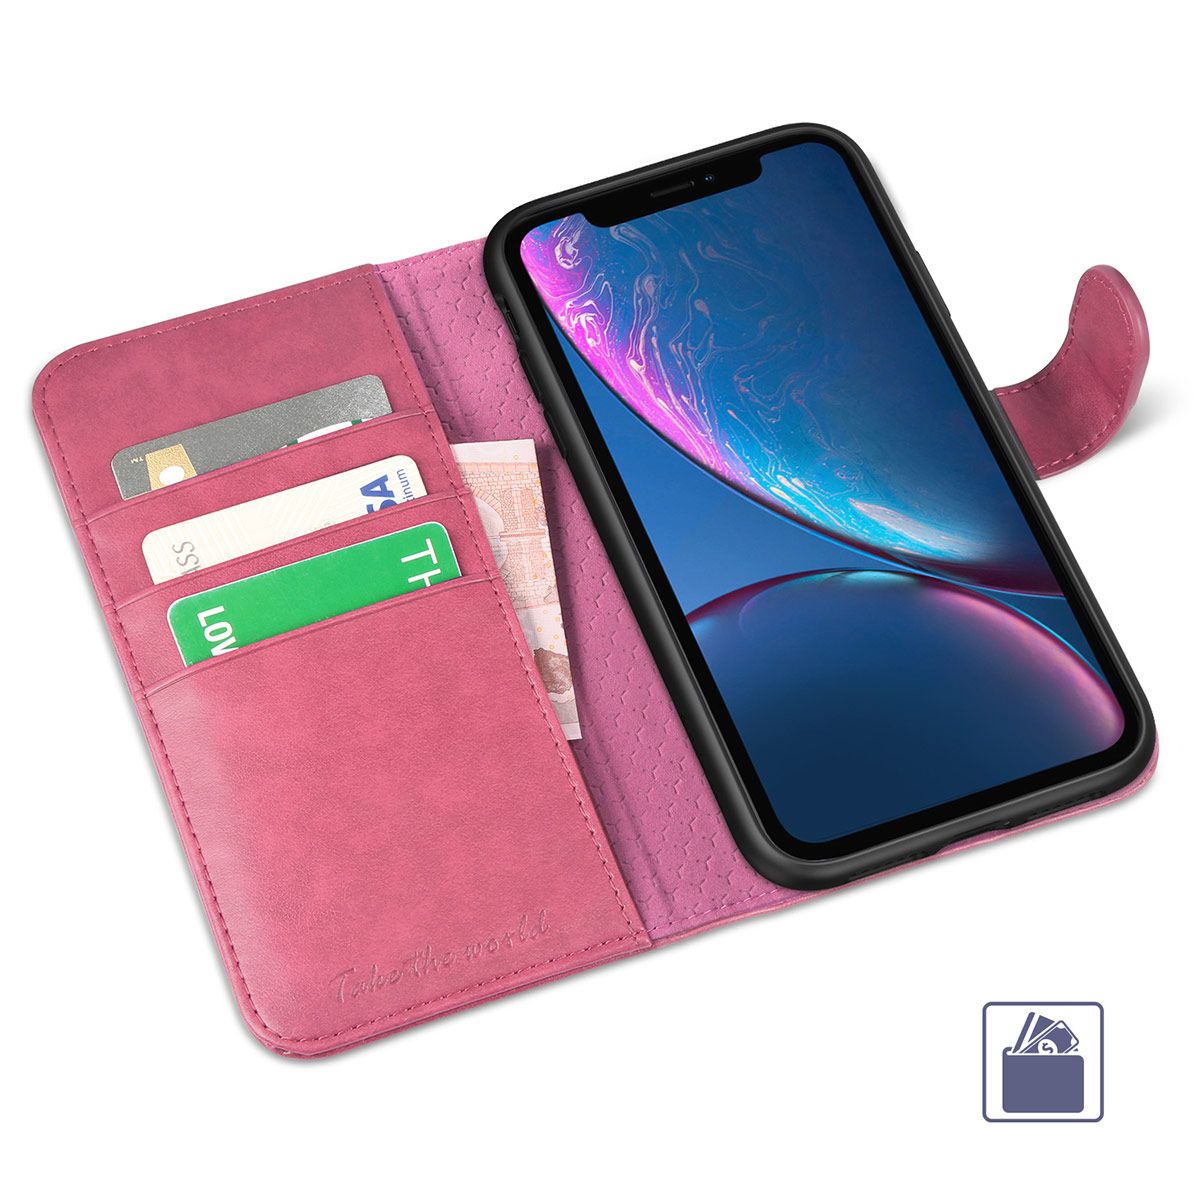 TUCCH iPhone 11 Pro Max Wallet Case, iPhone 11 Pro Max Leather Case, Folio Flip Cover with RFID ...